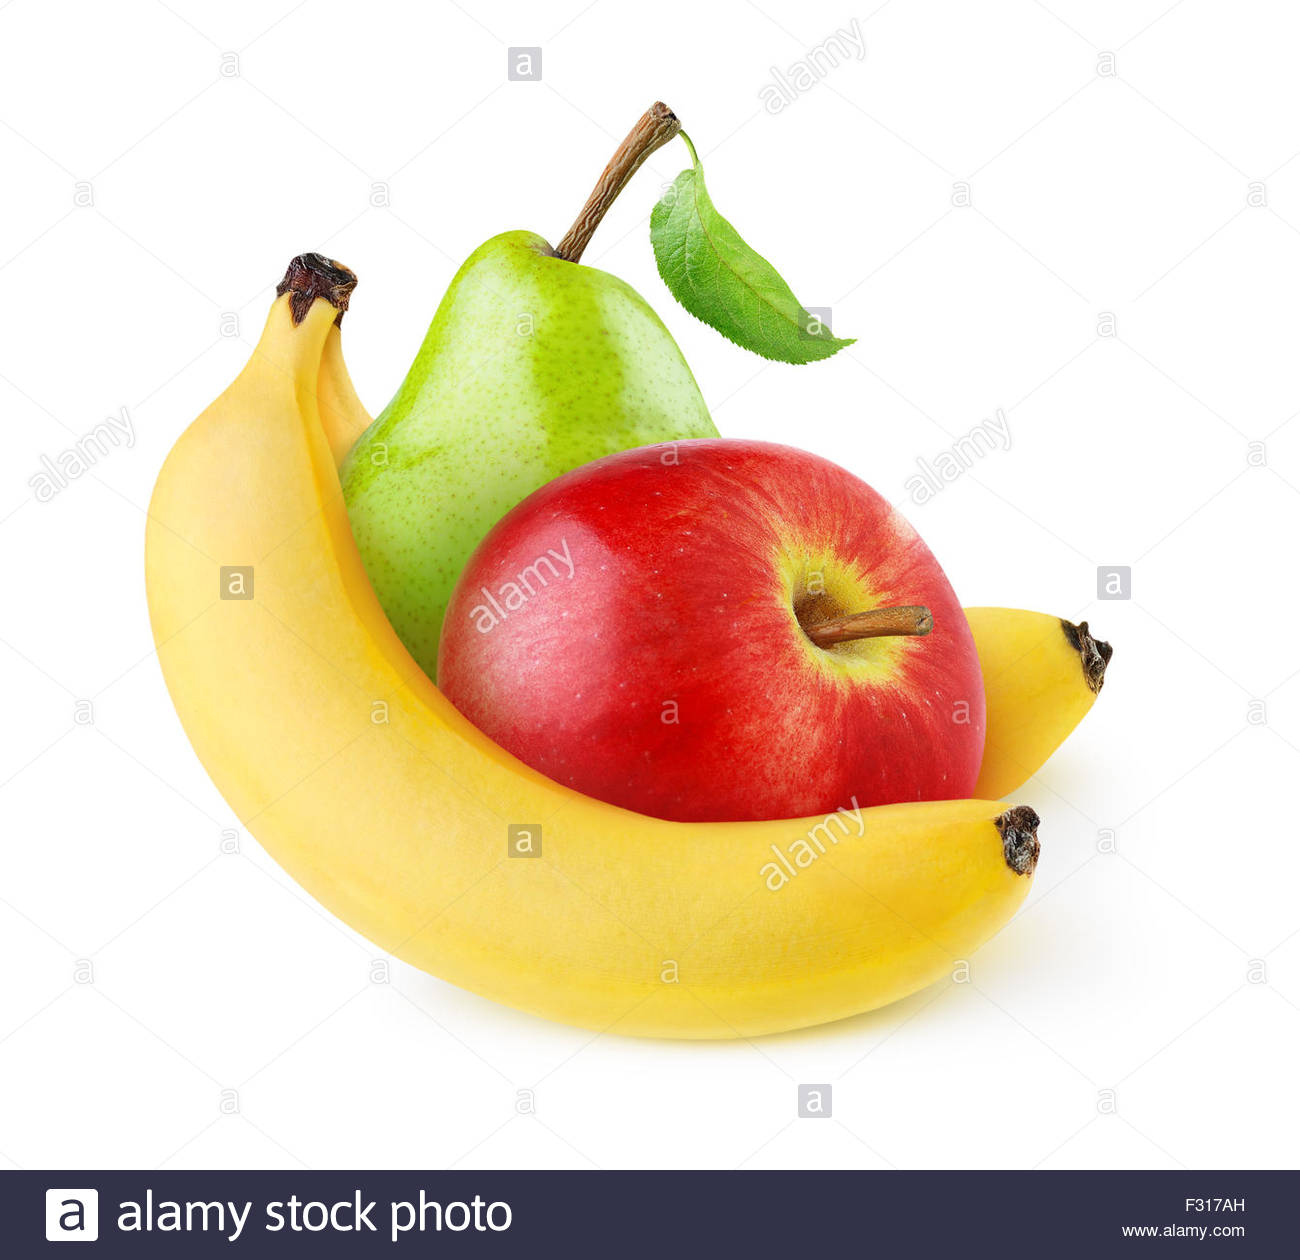 fresh banana apple and pear isolated on white F317AH